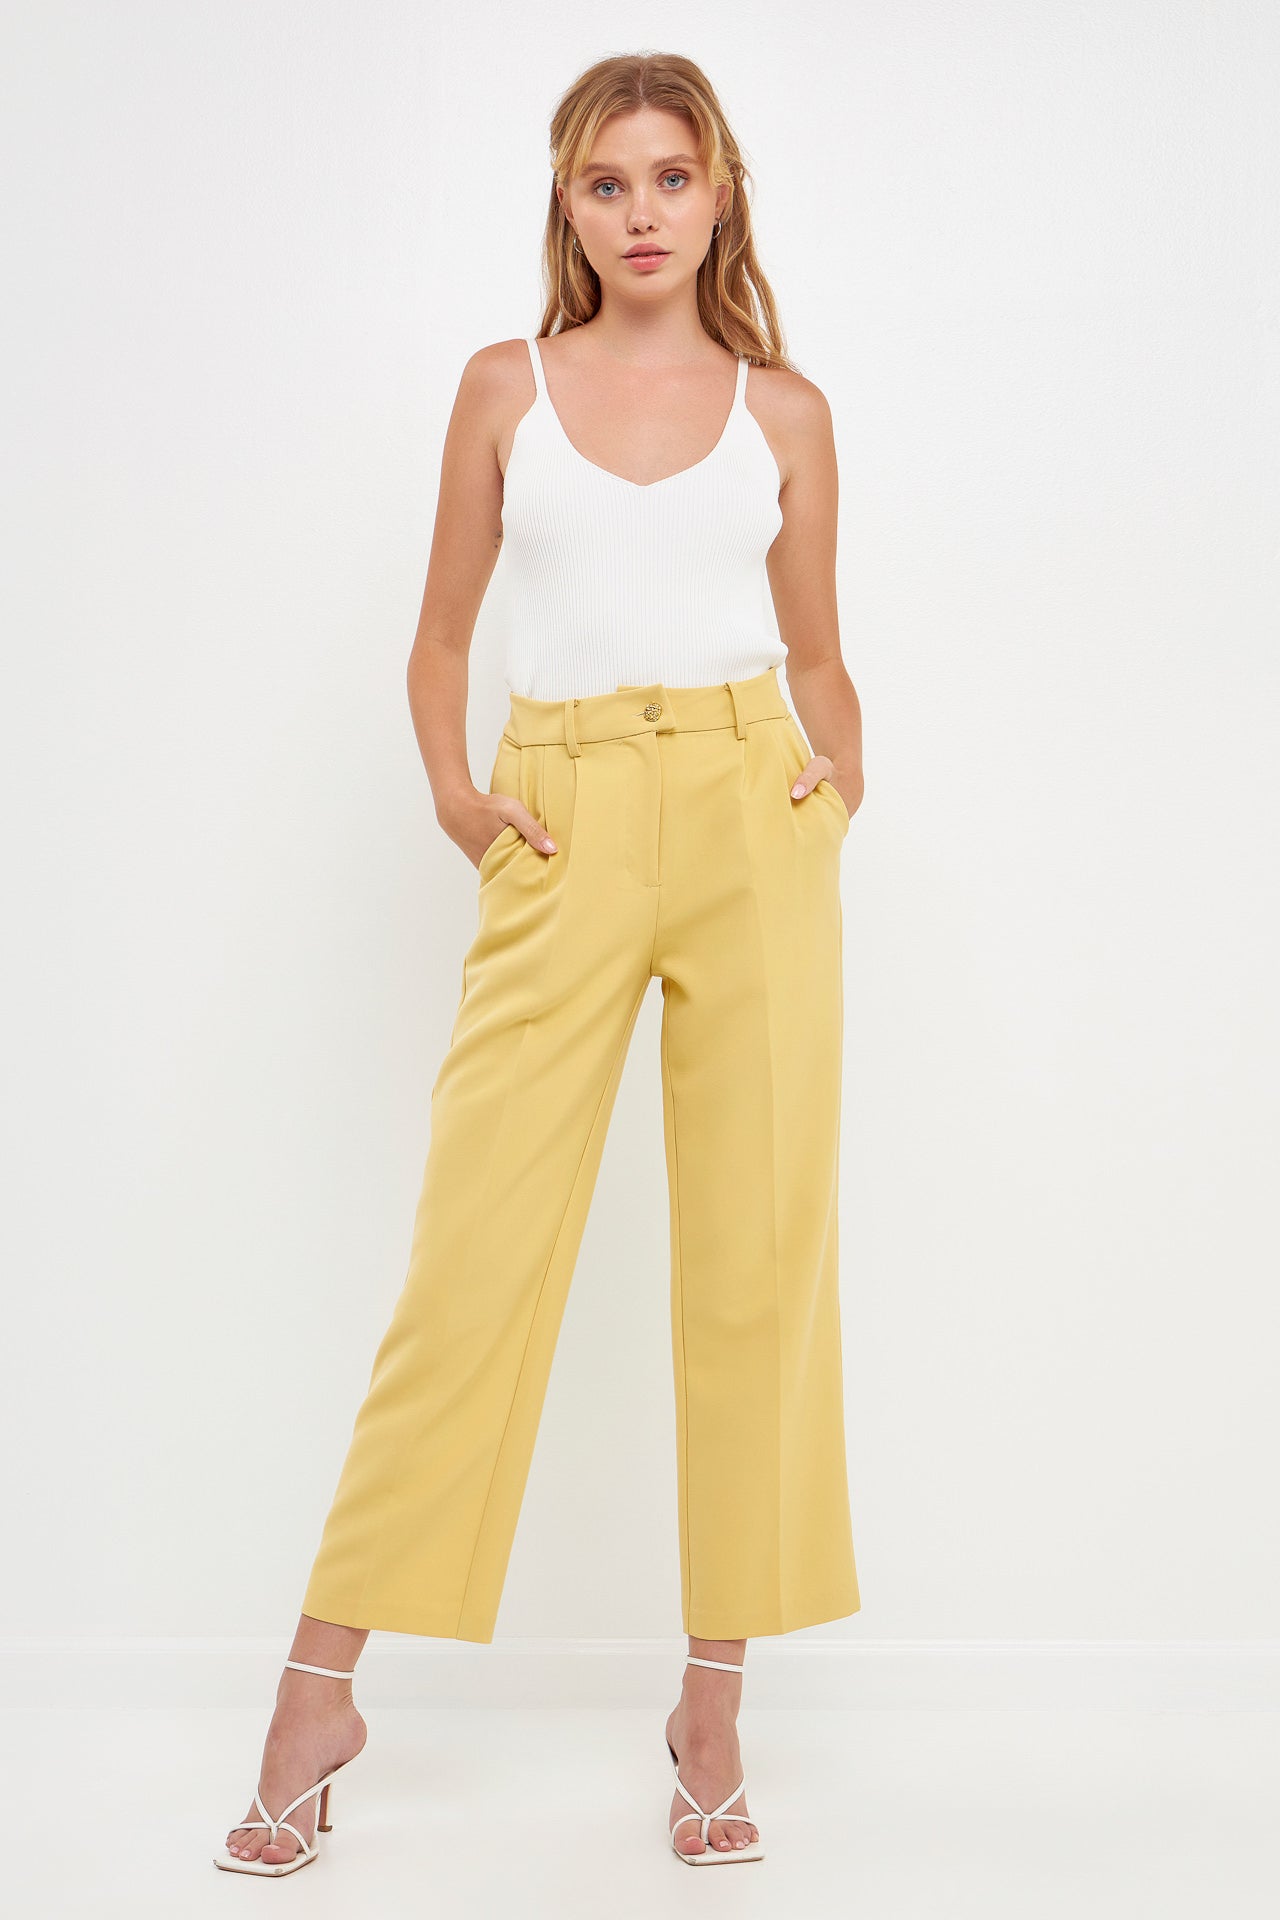 Cyber&Monday Deals Dyegold Palazzo Pants For Women Stretchy Straight Wide  Leg Lounge Pants Casual Comfy High Waist Trousers Pants With Pockets 